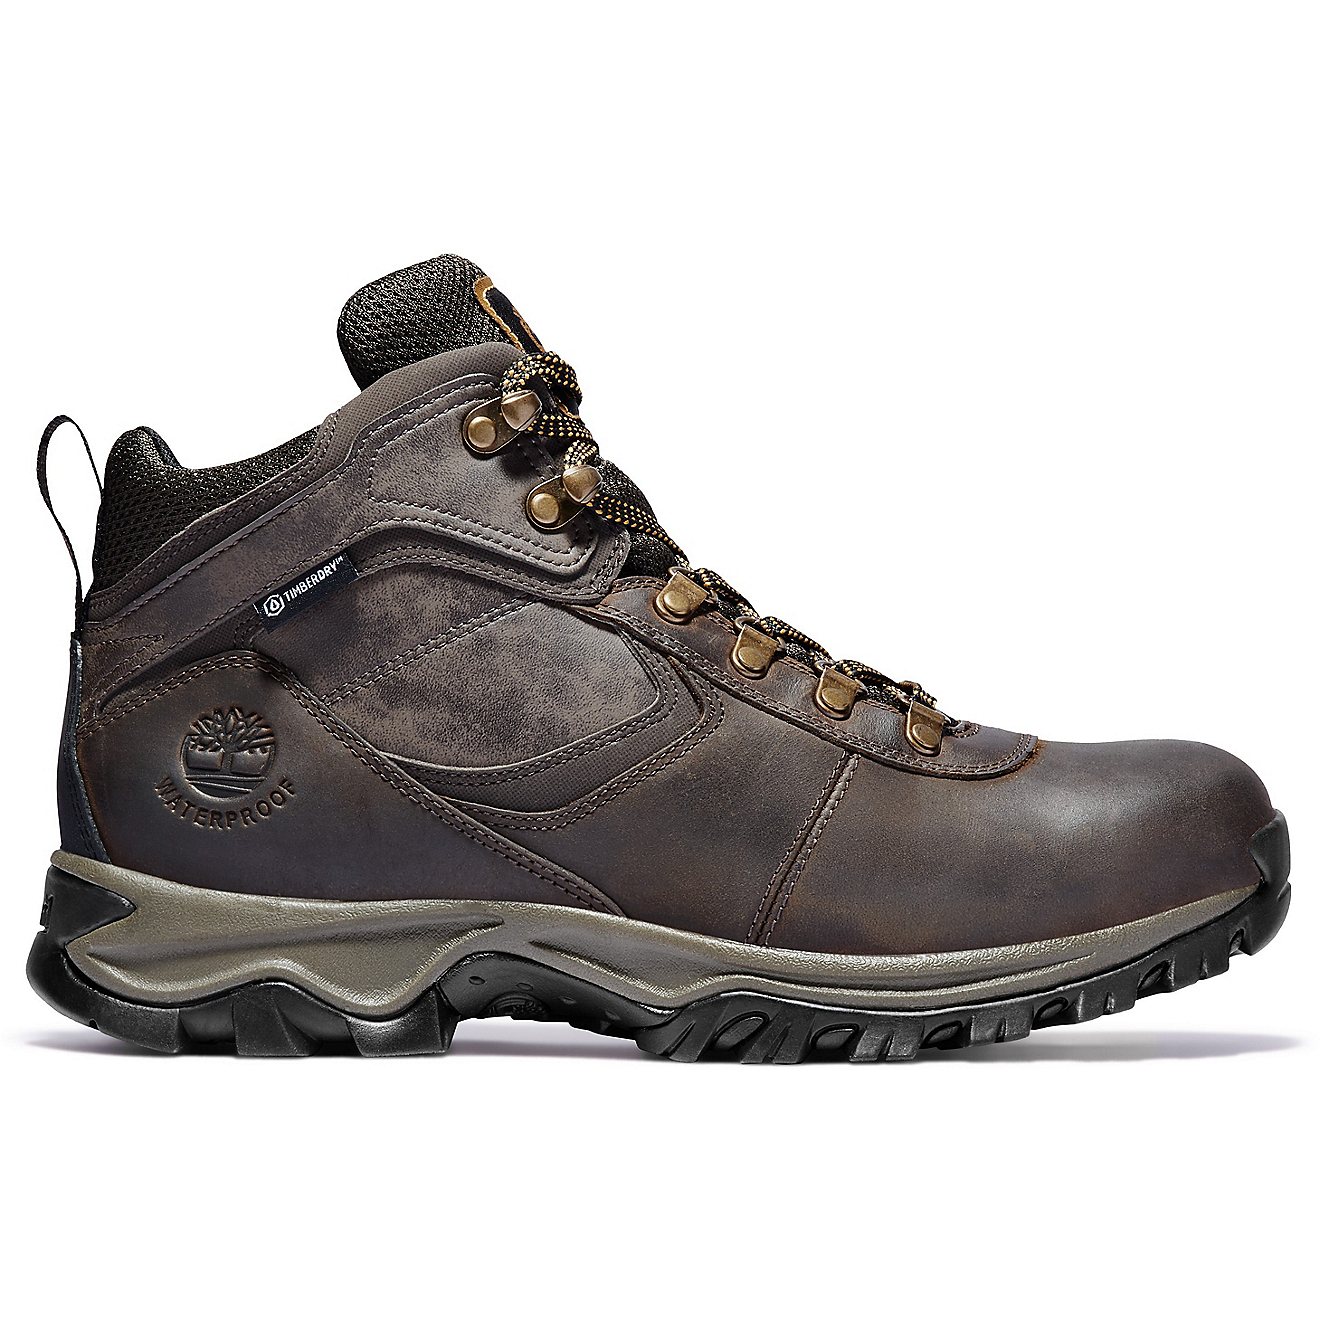 Timberland Men's Mt. Maddsen Waterproof Mid Hiking Boots                                                                         - view number 1